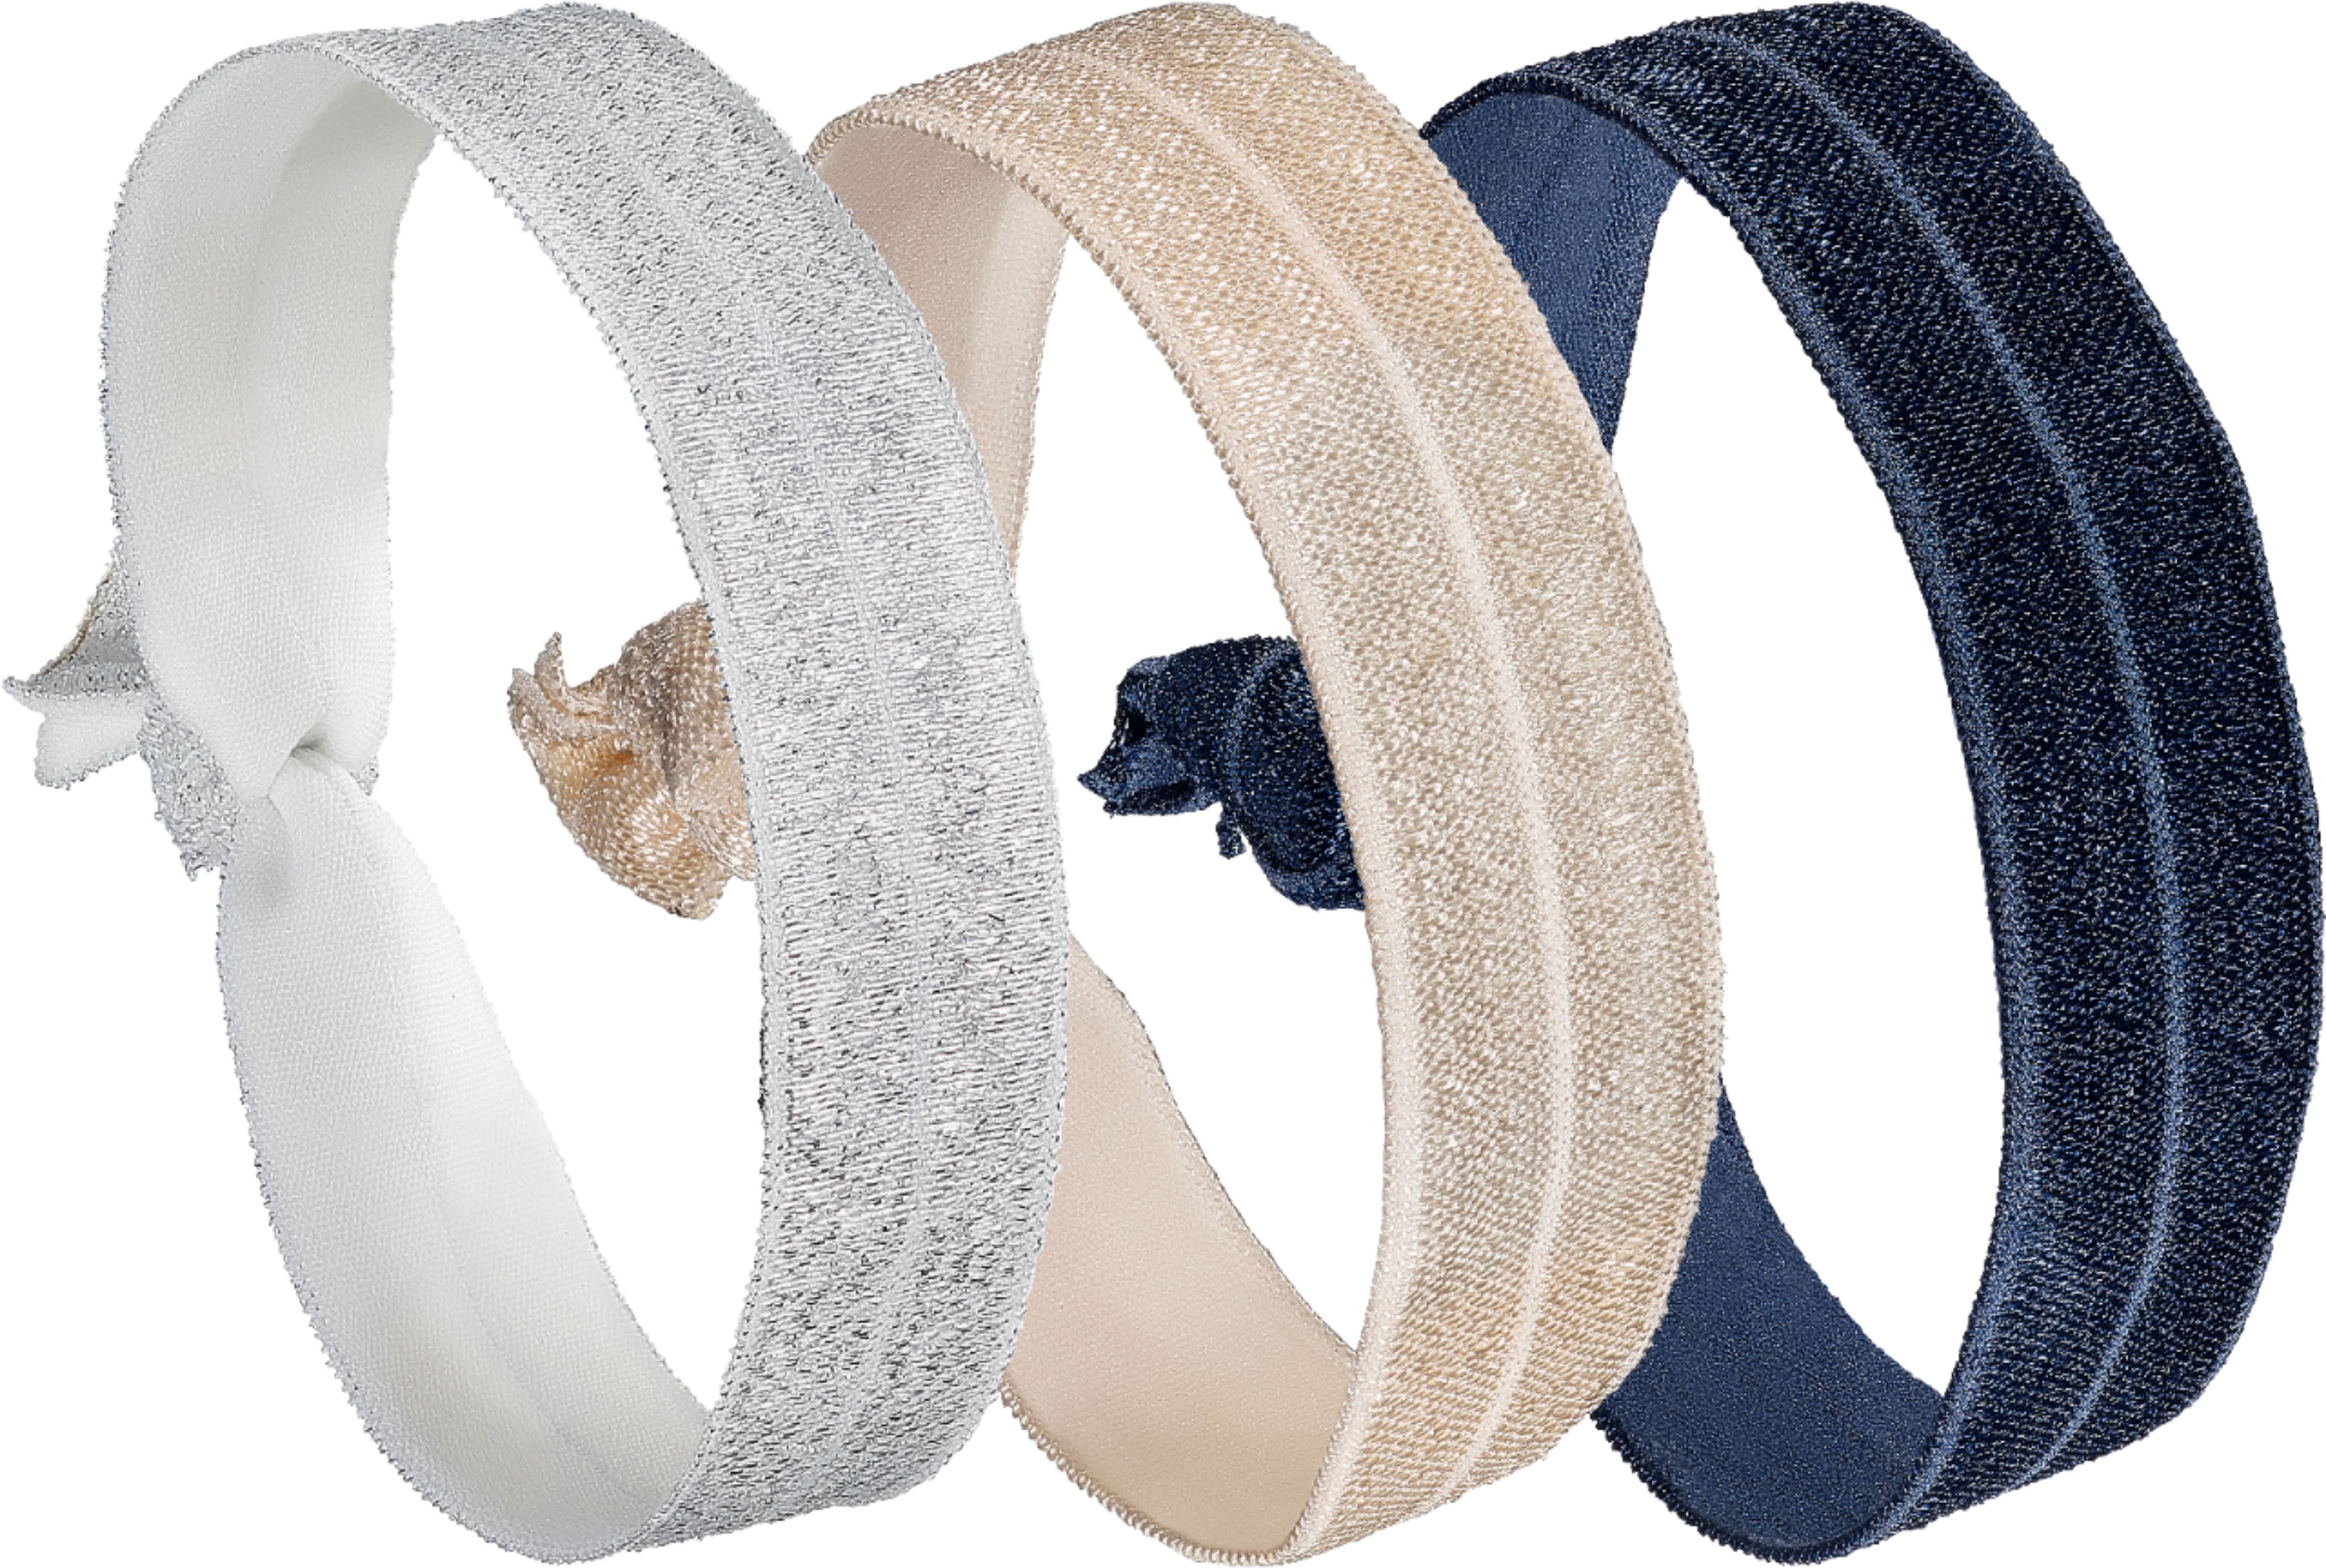 Bitbelt Band Lock for Magicband, Fitbit,Vivofit- 2 Pack 90 Day Warranty. We  Invented The Fitbit Clasp fix. (Clear)